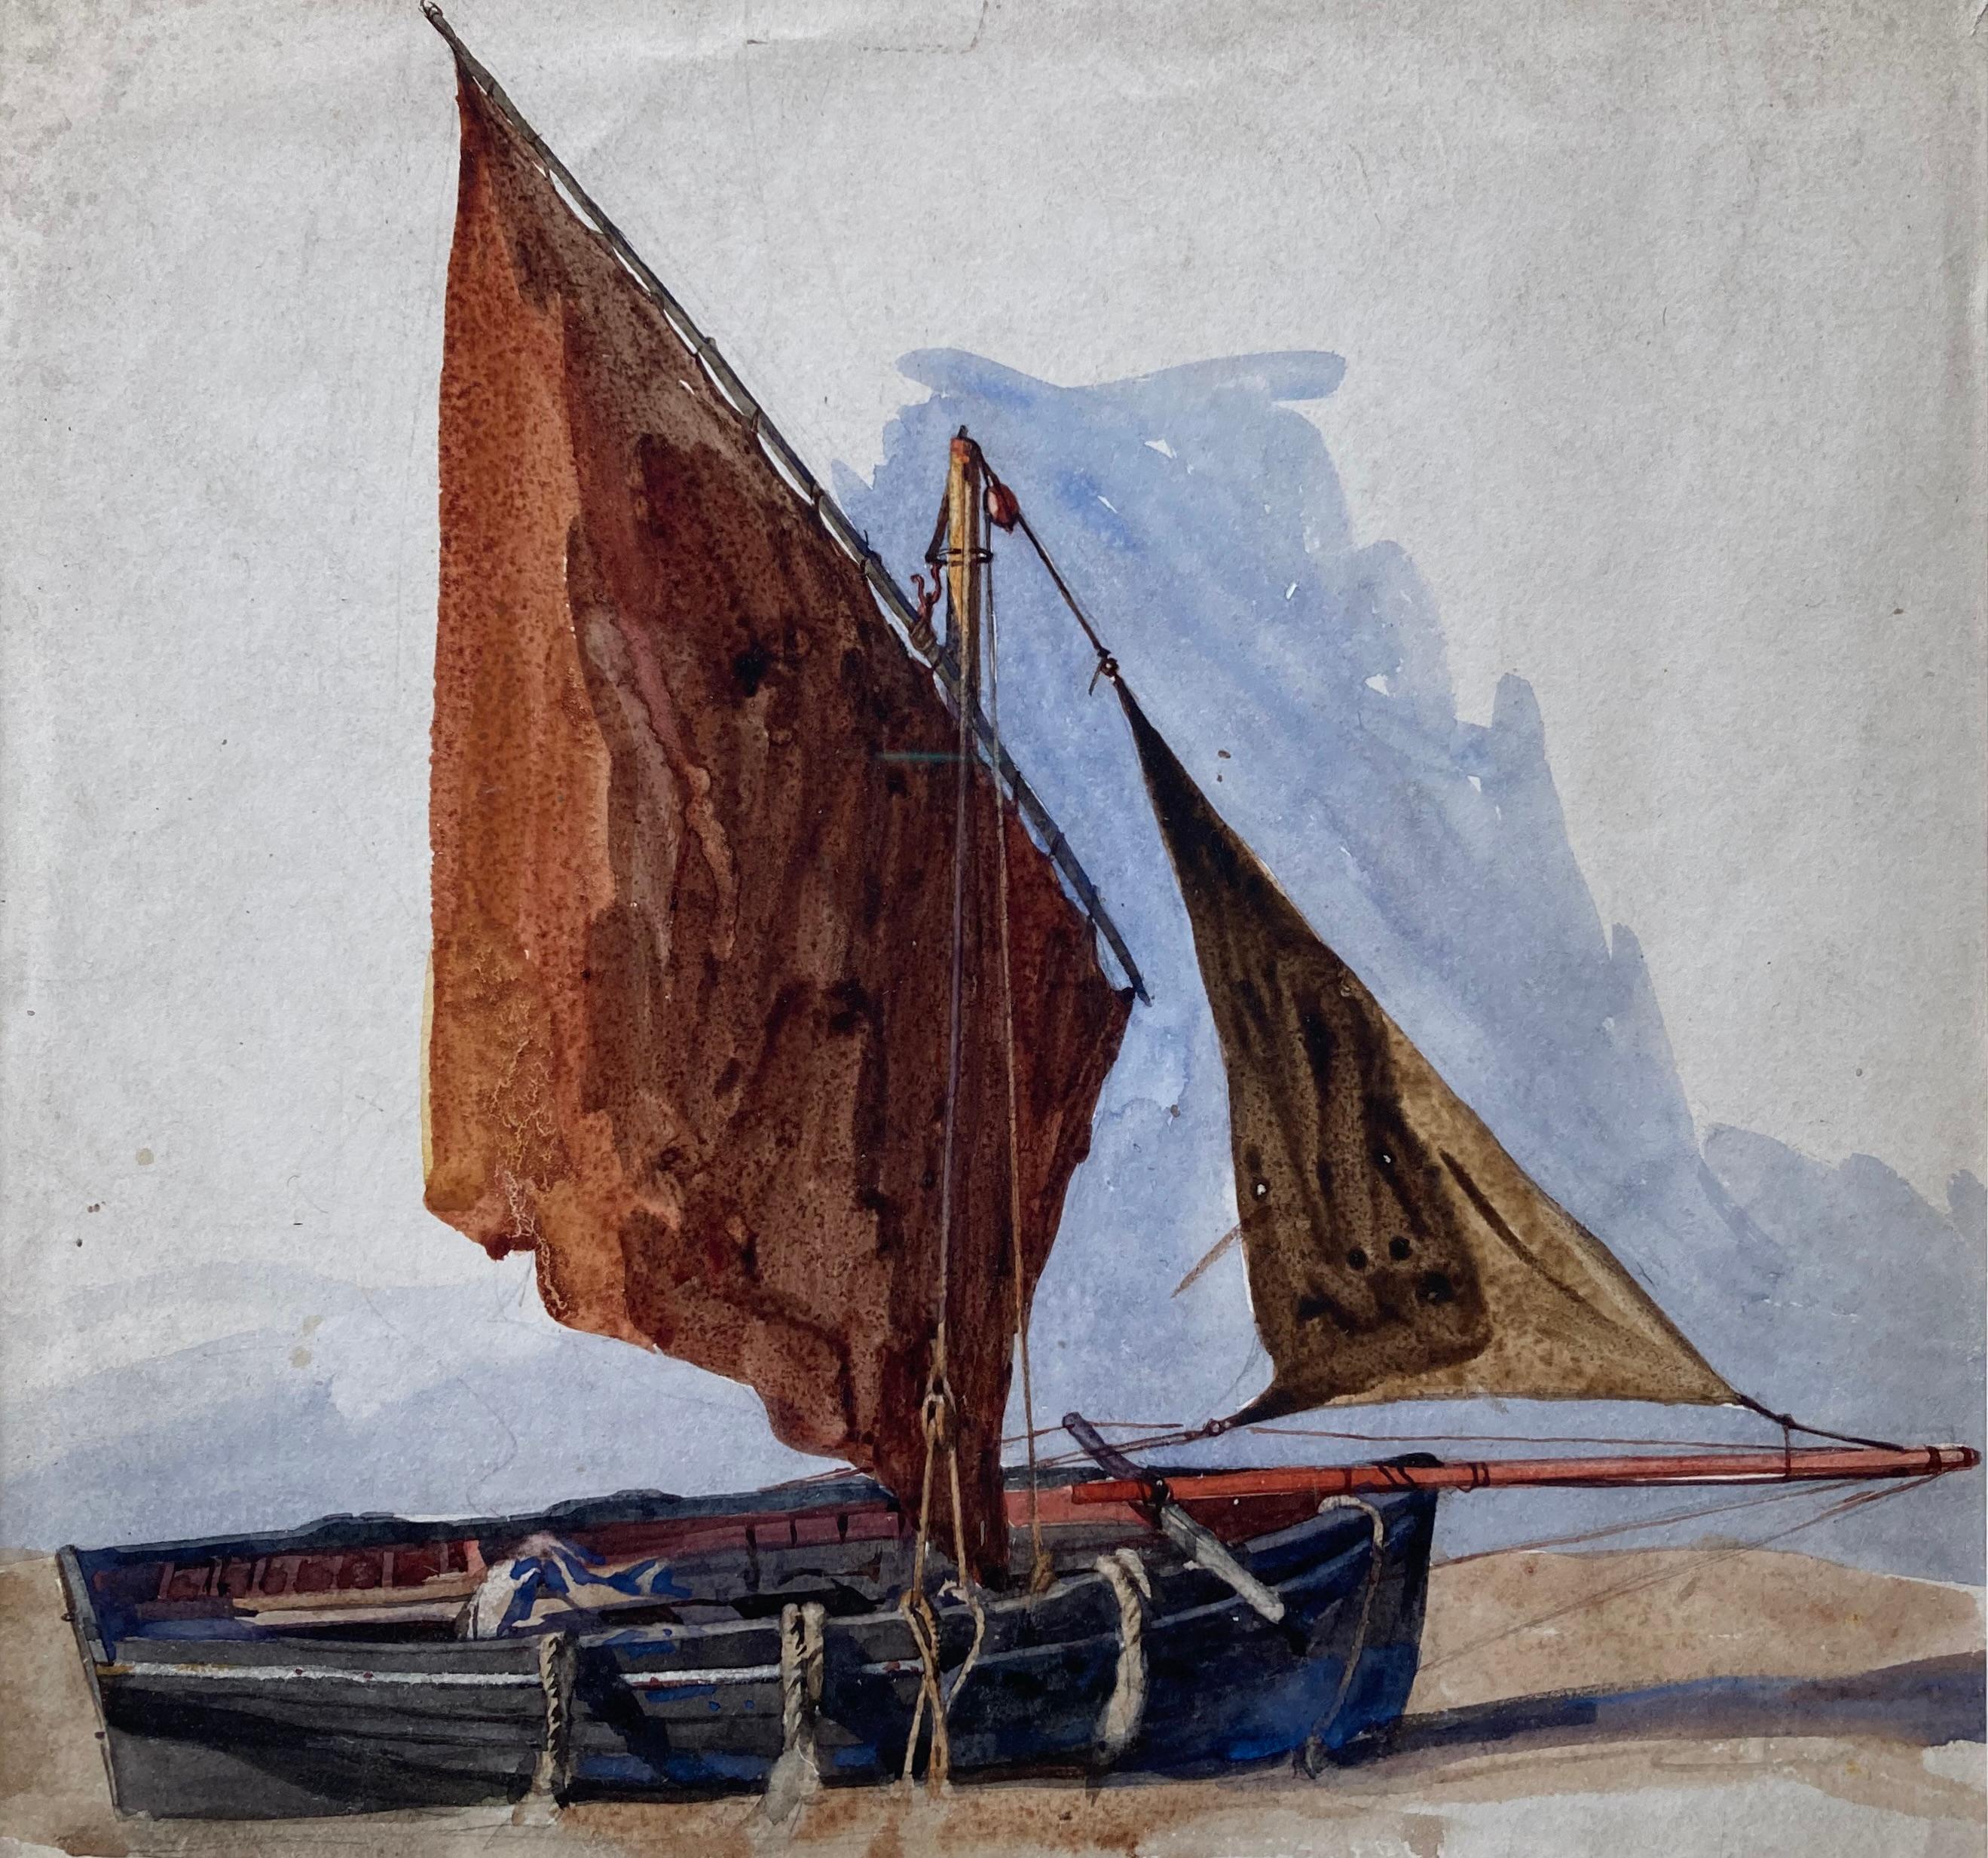 Cotman marine watercolor of sailing boat on the beach - Victorian Art by Frederick George Cotman